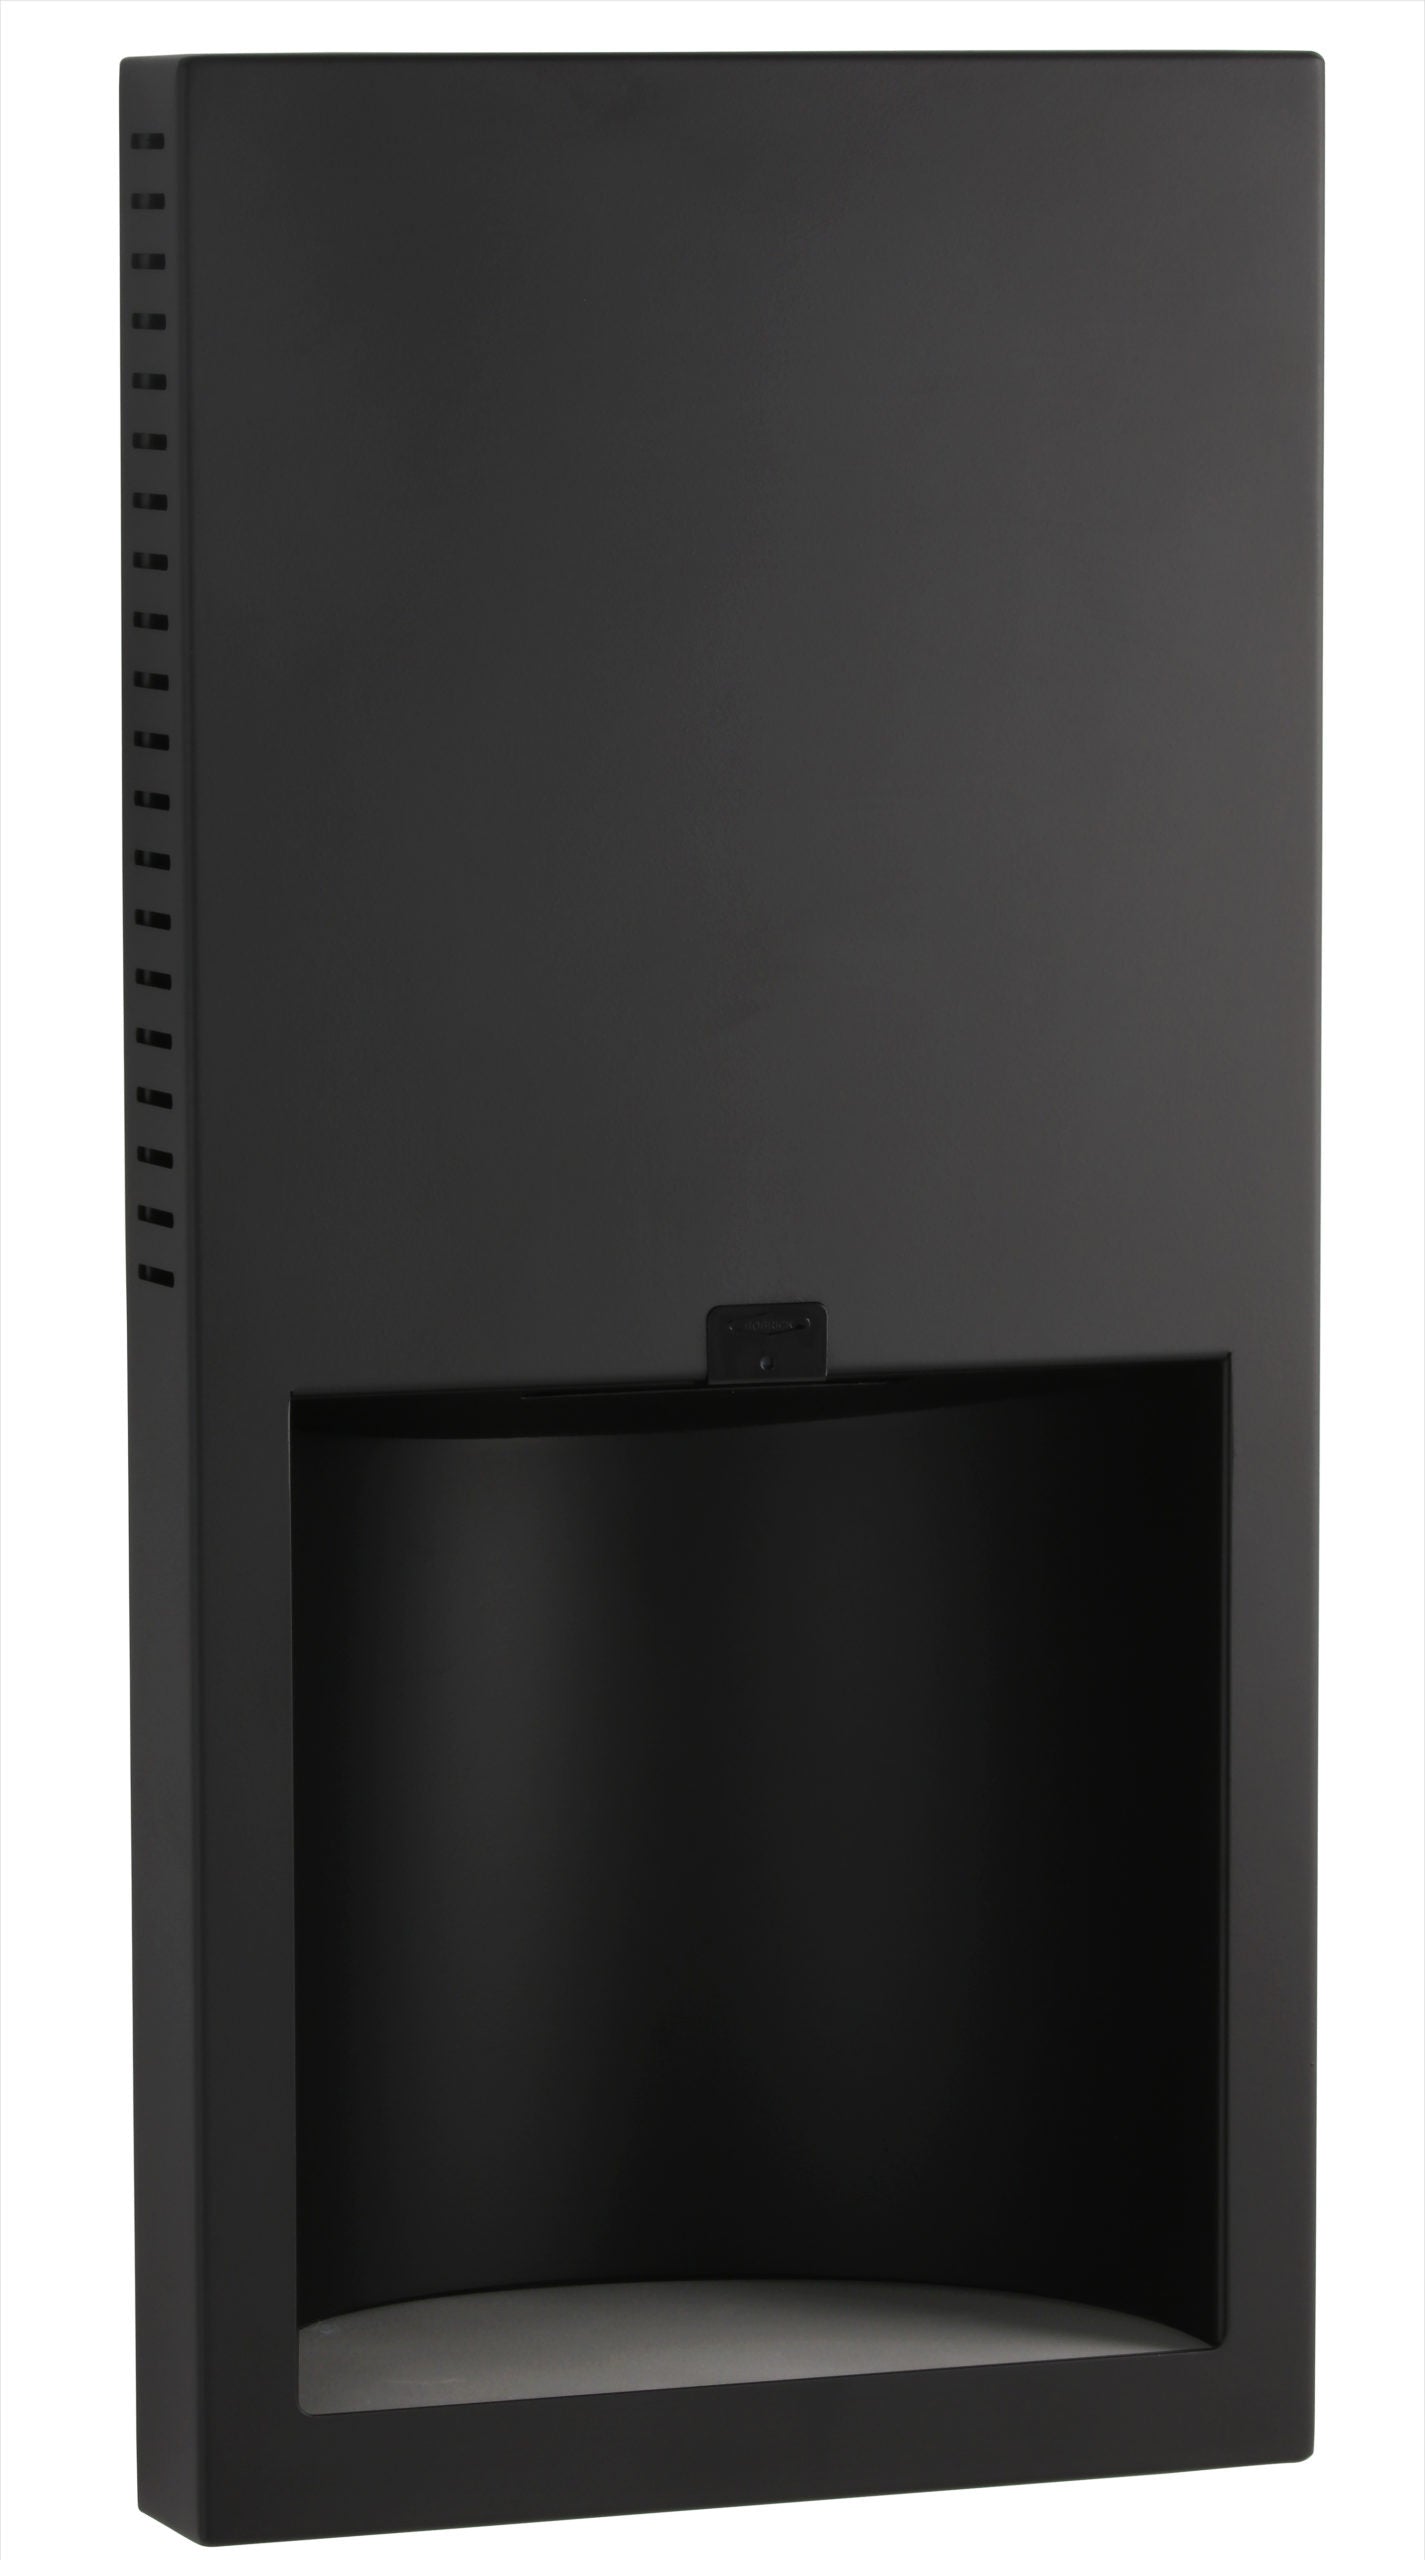 The Bobrick B-3725 is an ADA-compliant recessed hand dryer in a matte black finish.